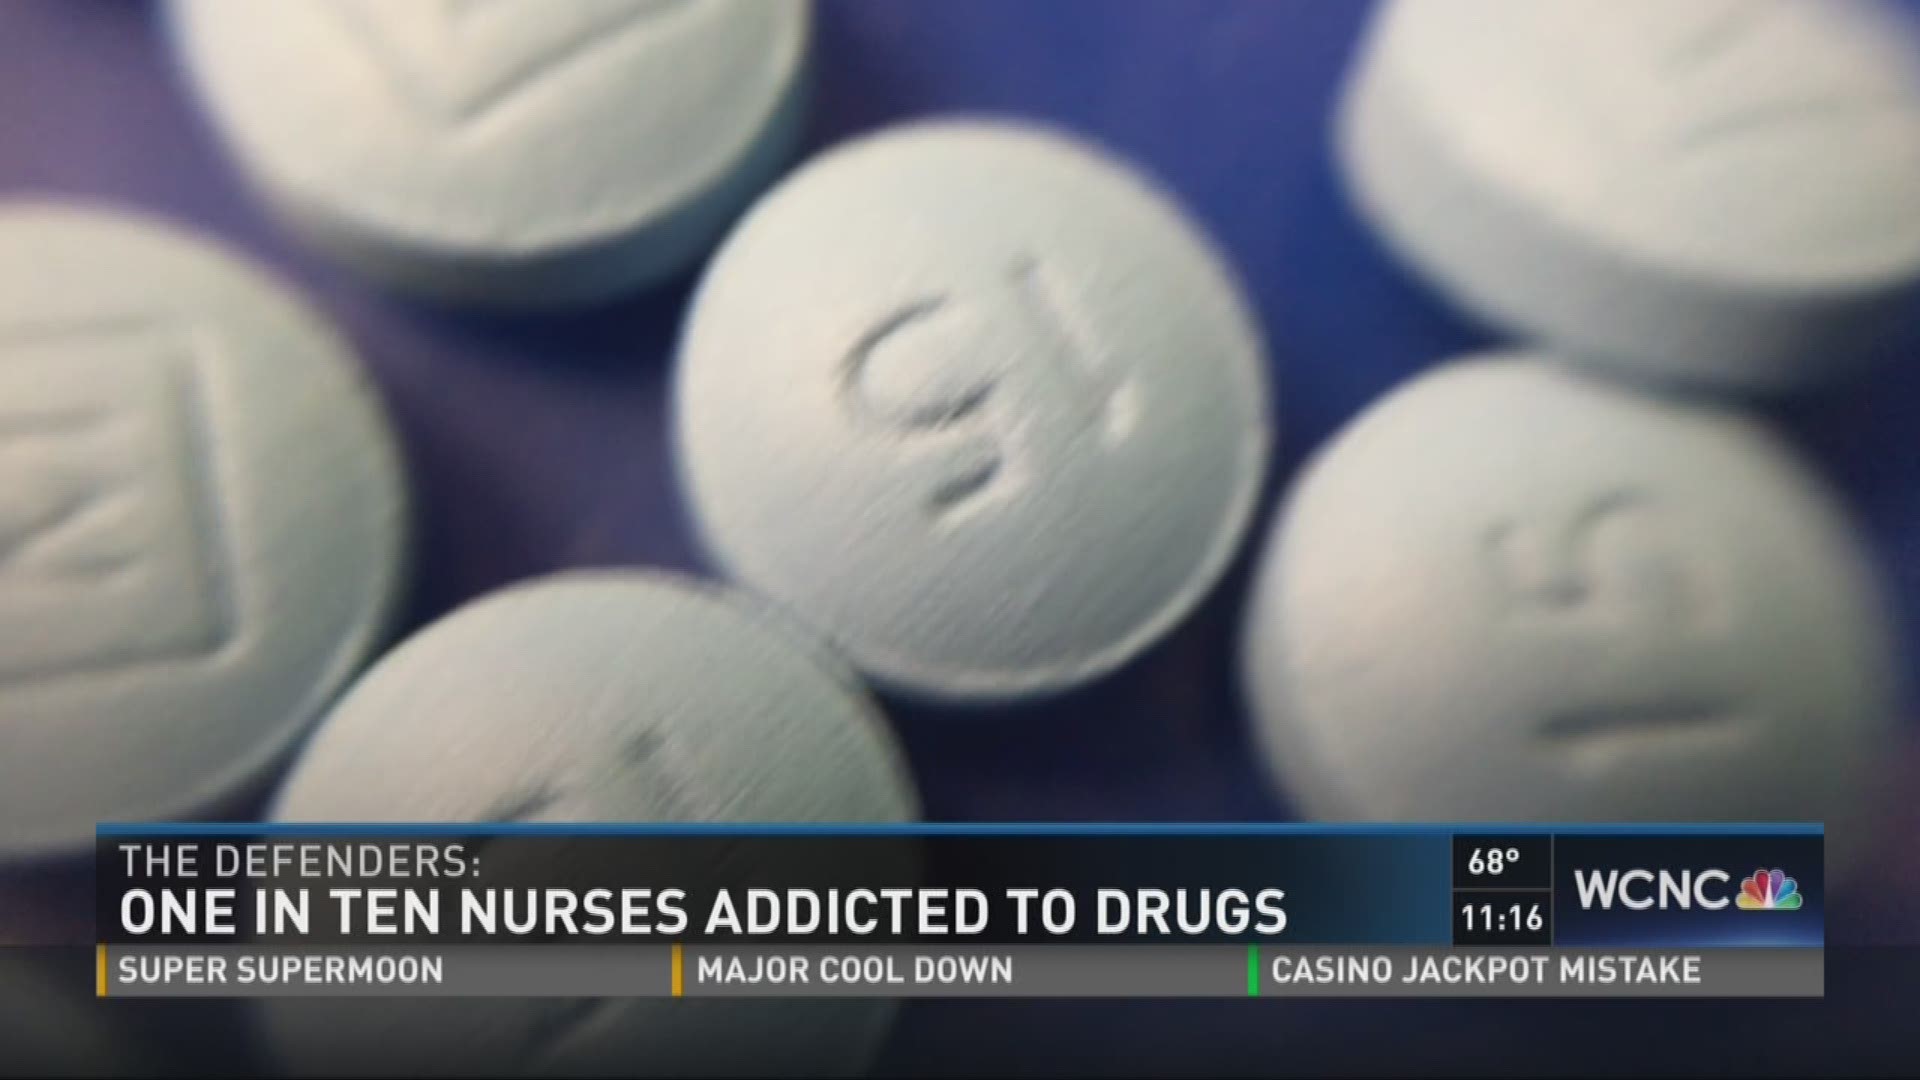 Surprising statistics show that one in ten nurses are addicted to drugs.